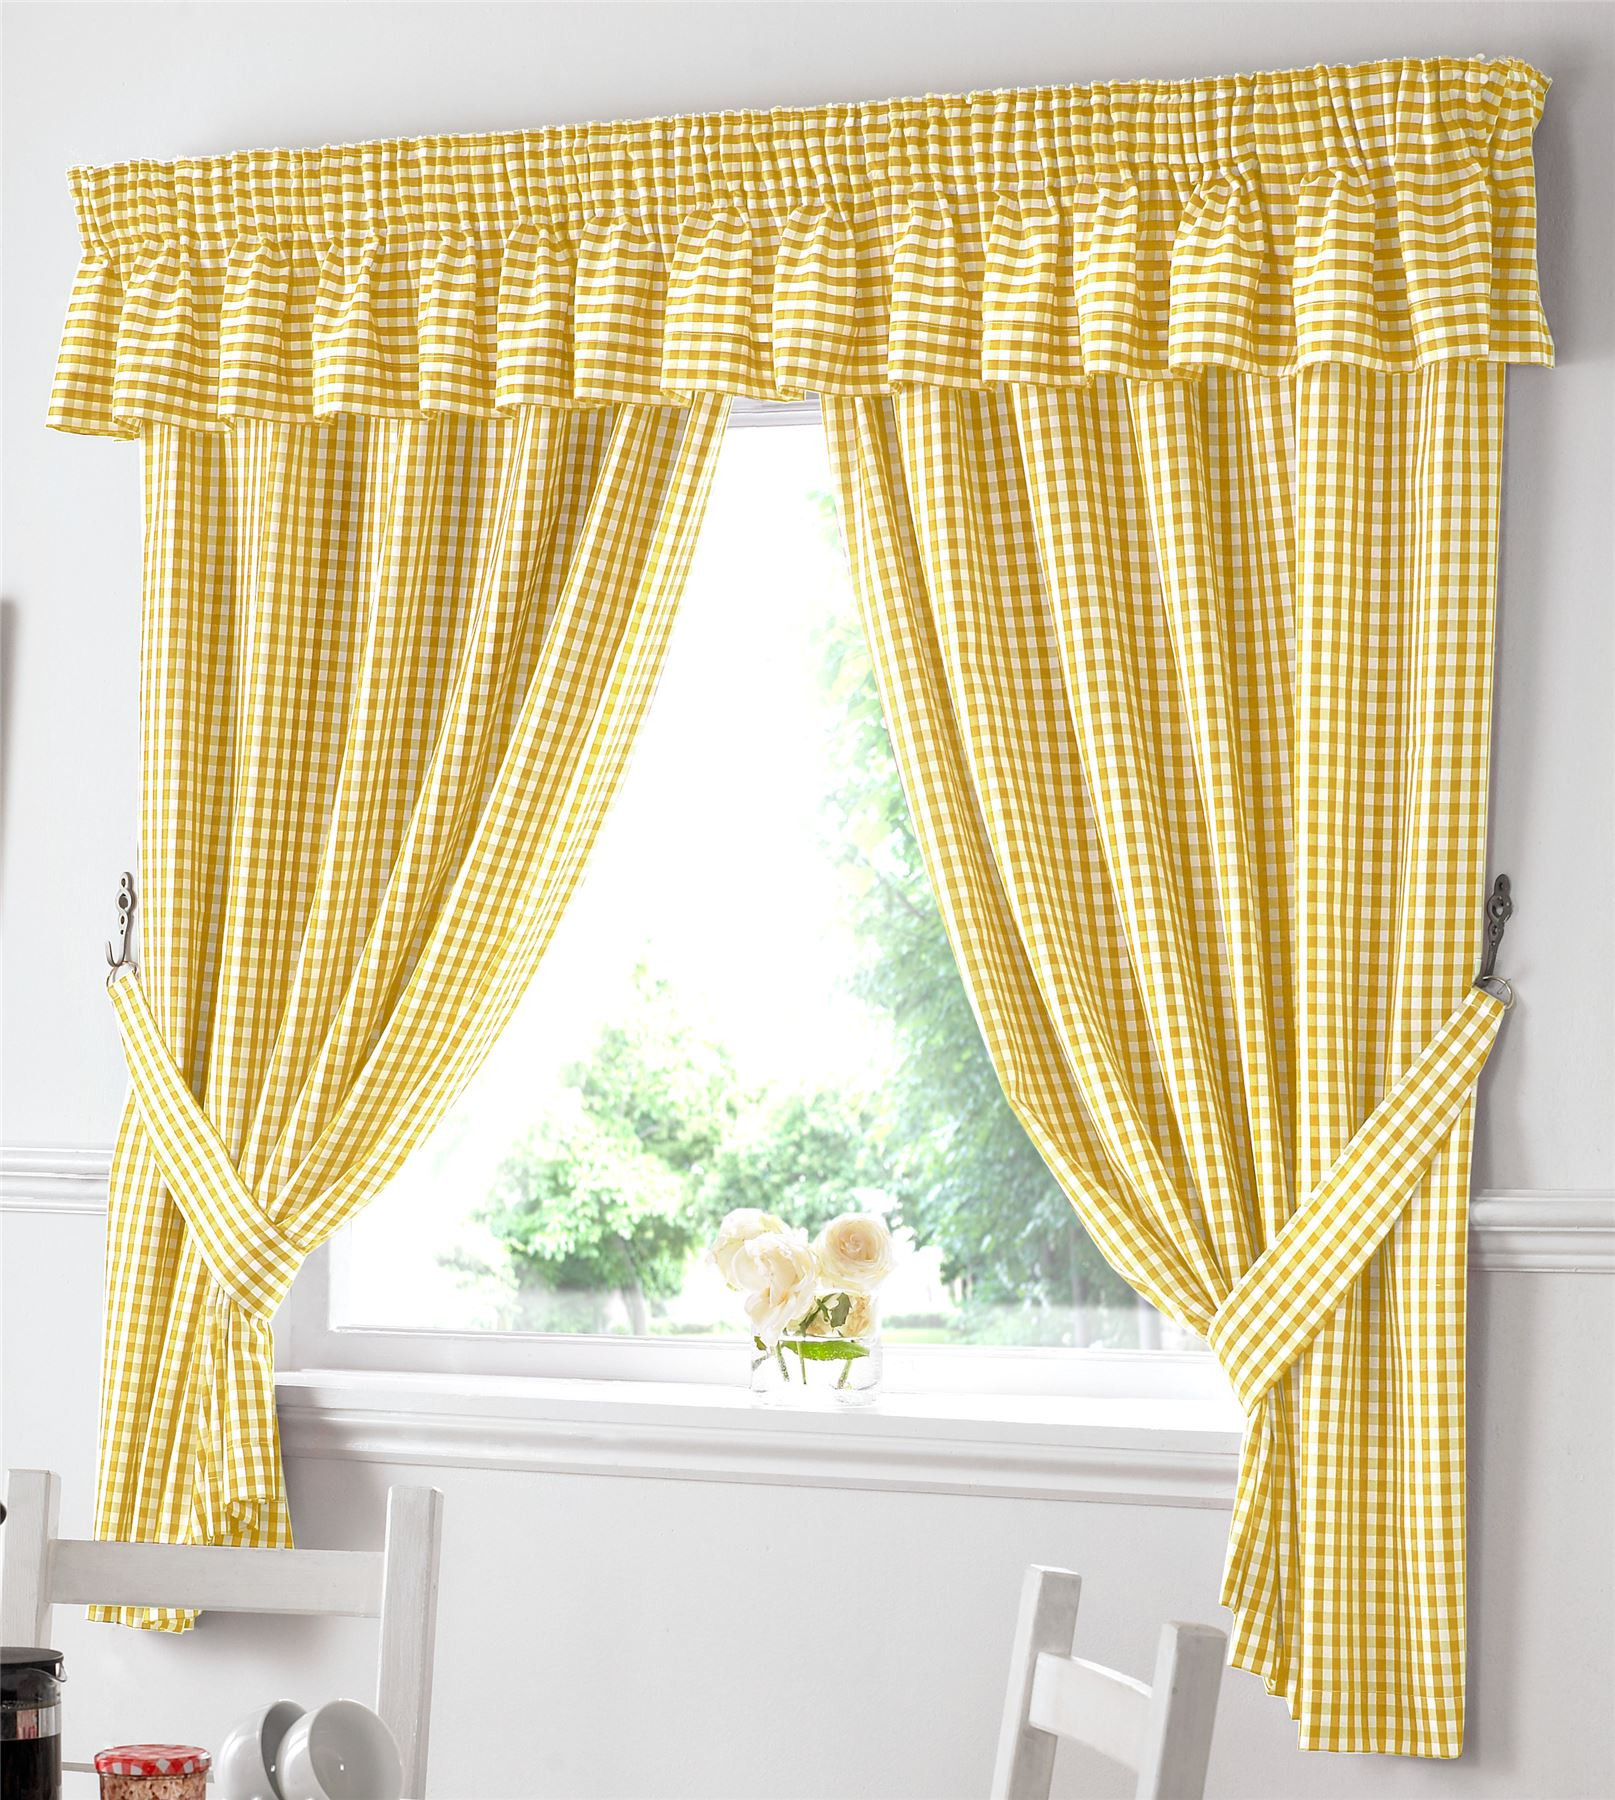 Gingham Kitchen Curtains
 Gingham Kitchen Window Curtains OR Matching Pelmet